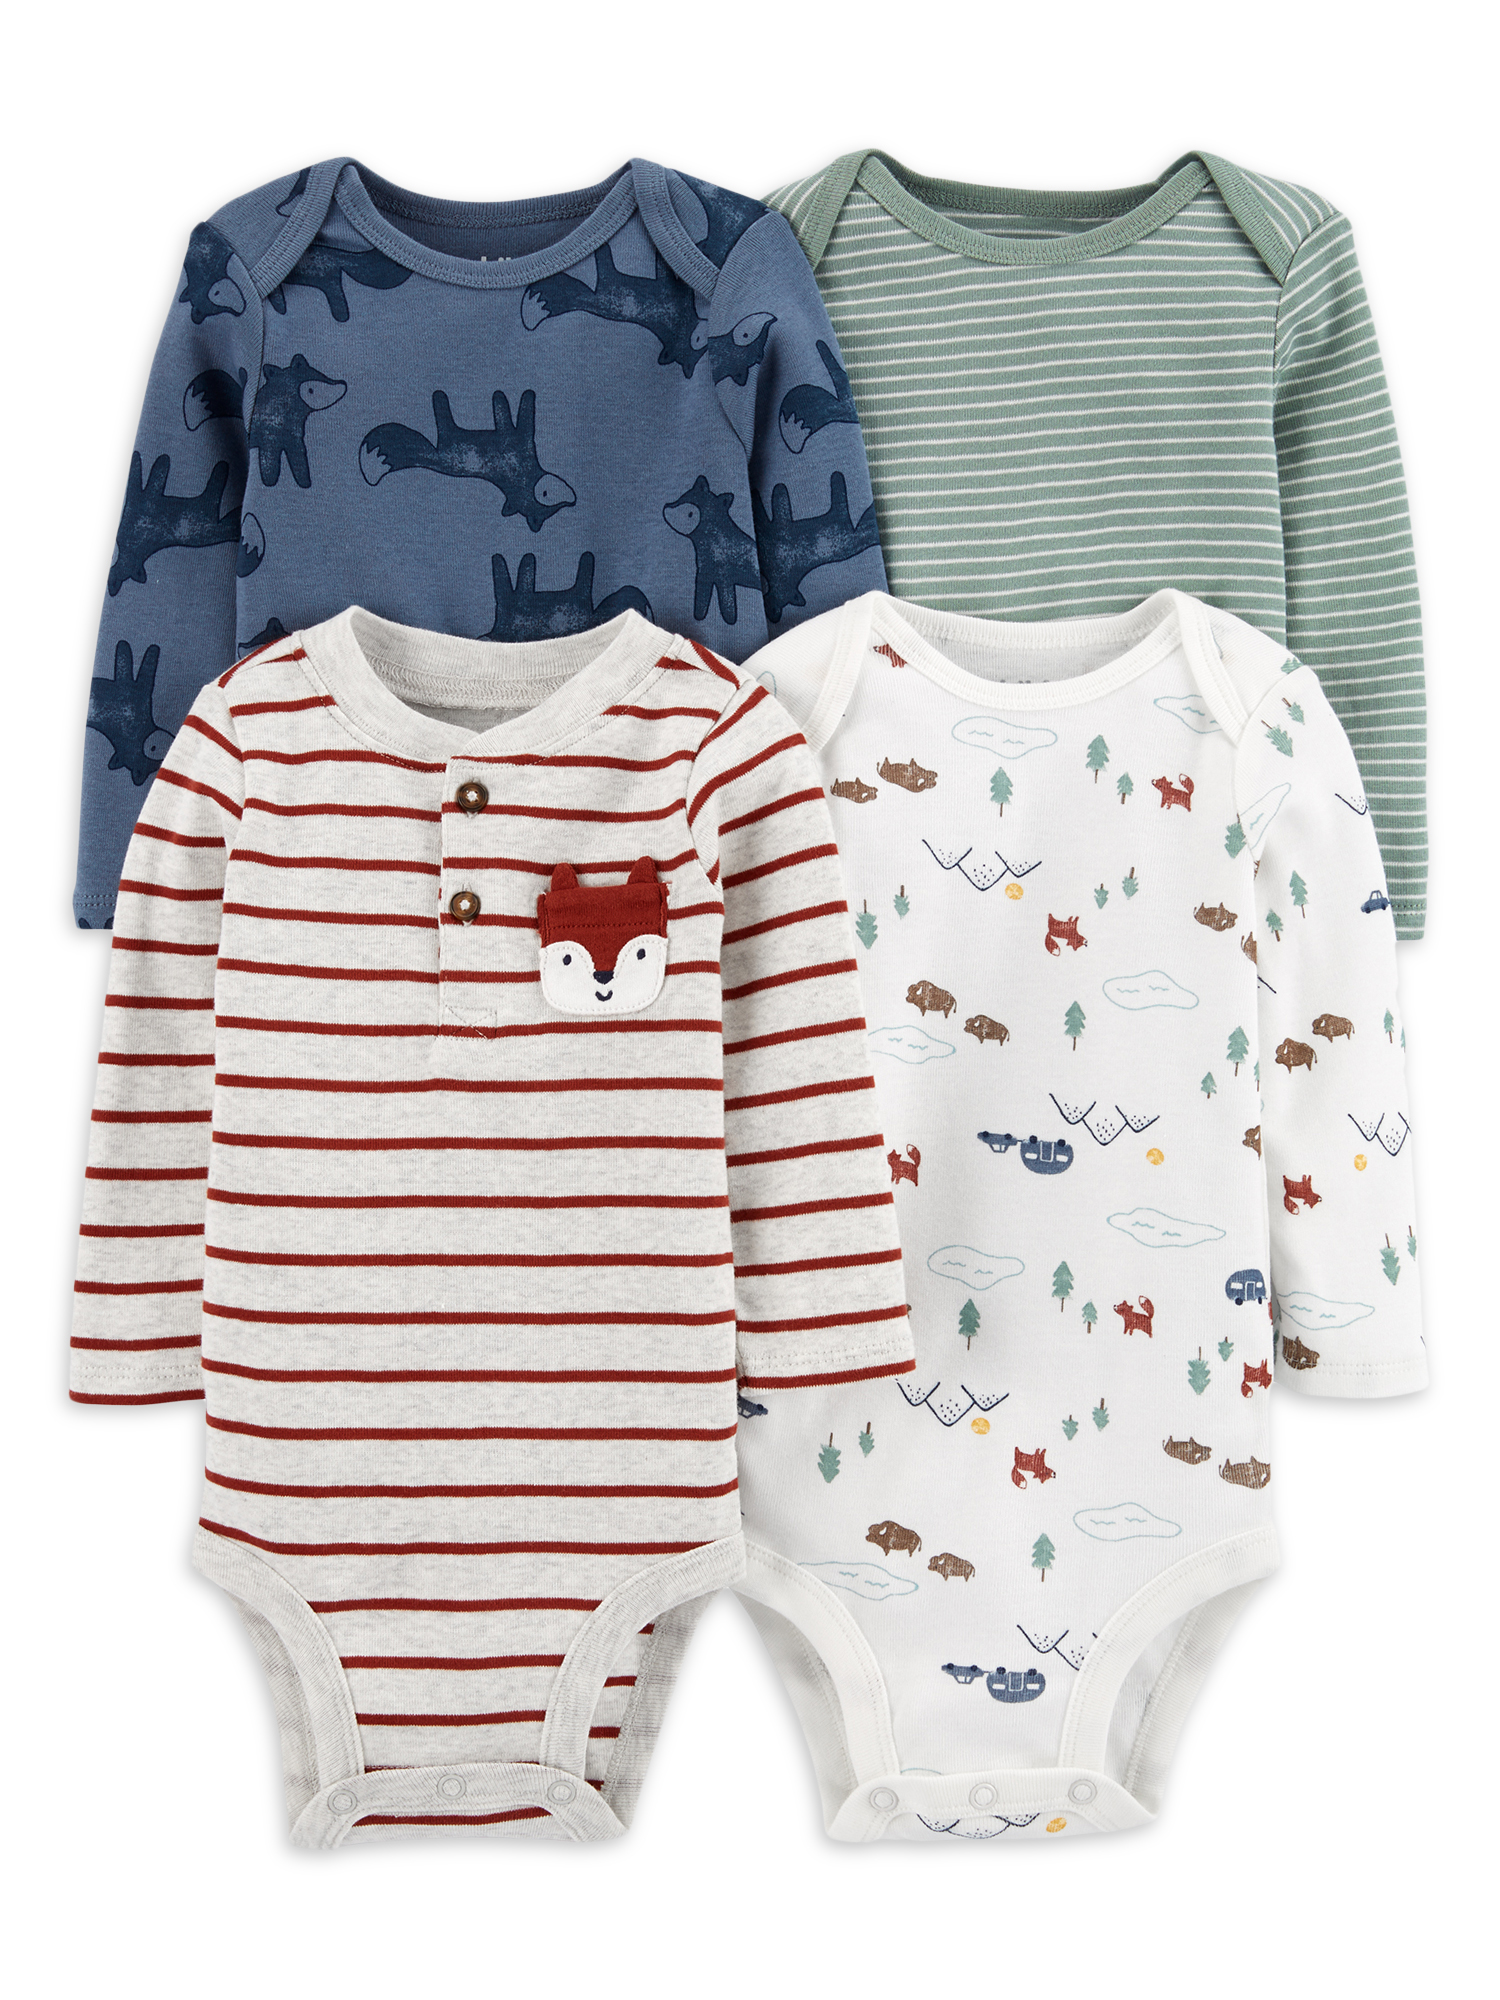 Carter's Child of Mine Baby Boys Long Sleeve Bodysuits, 4 Pack, Preemie-24 Months - image 1 of 7